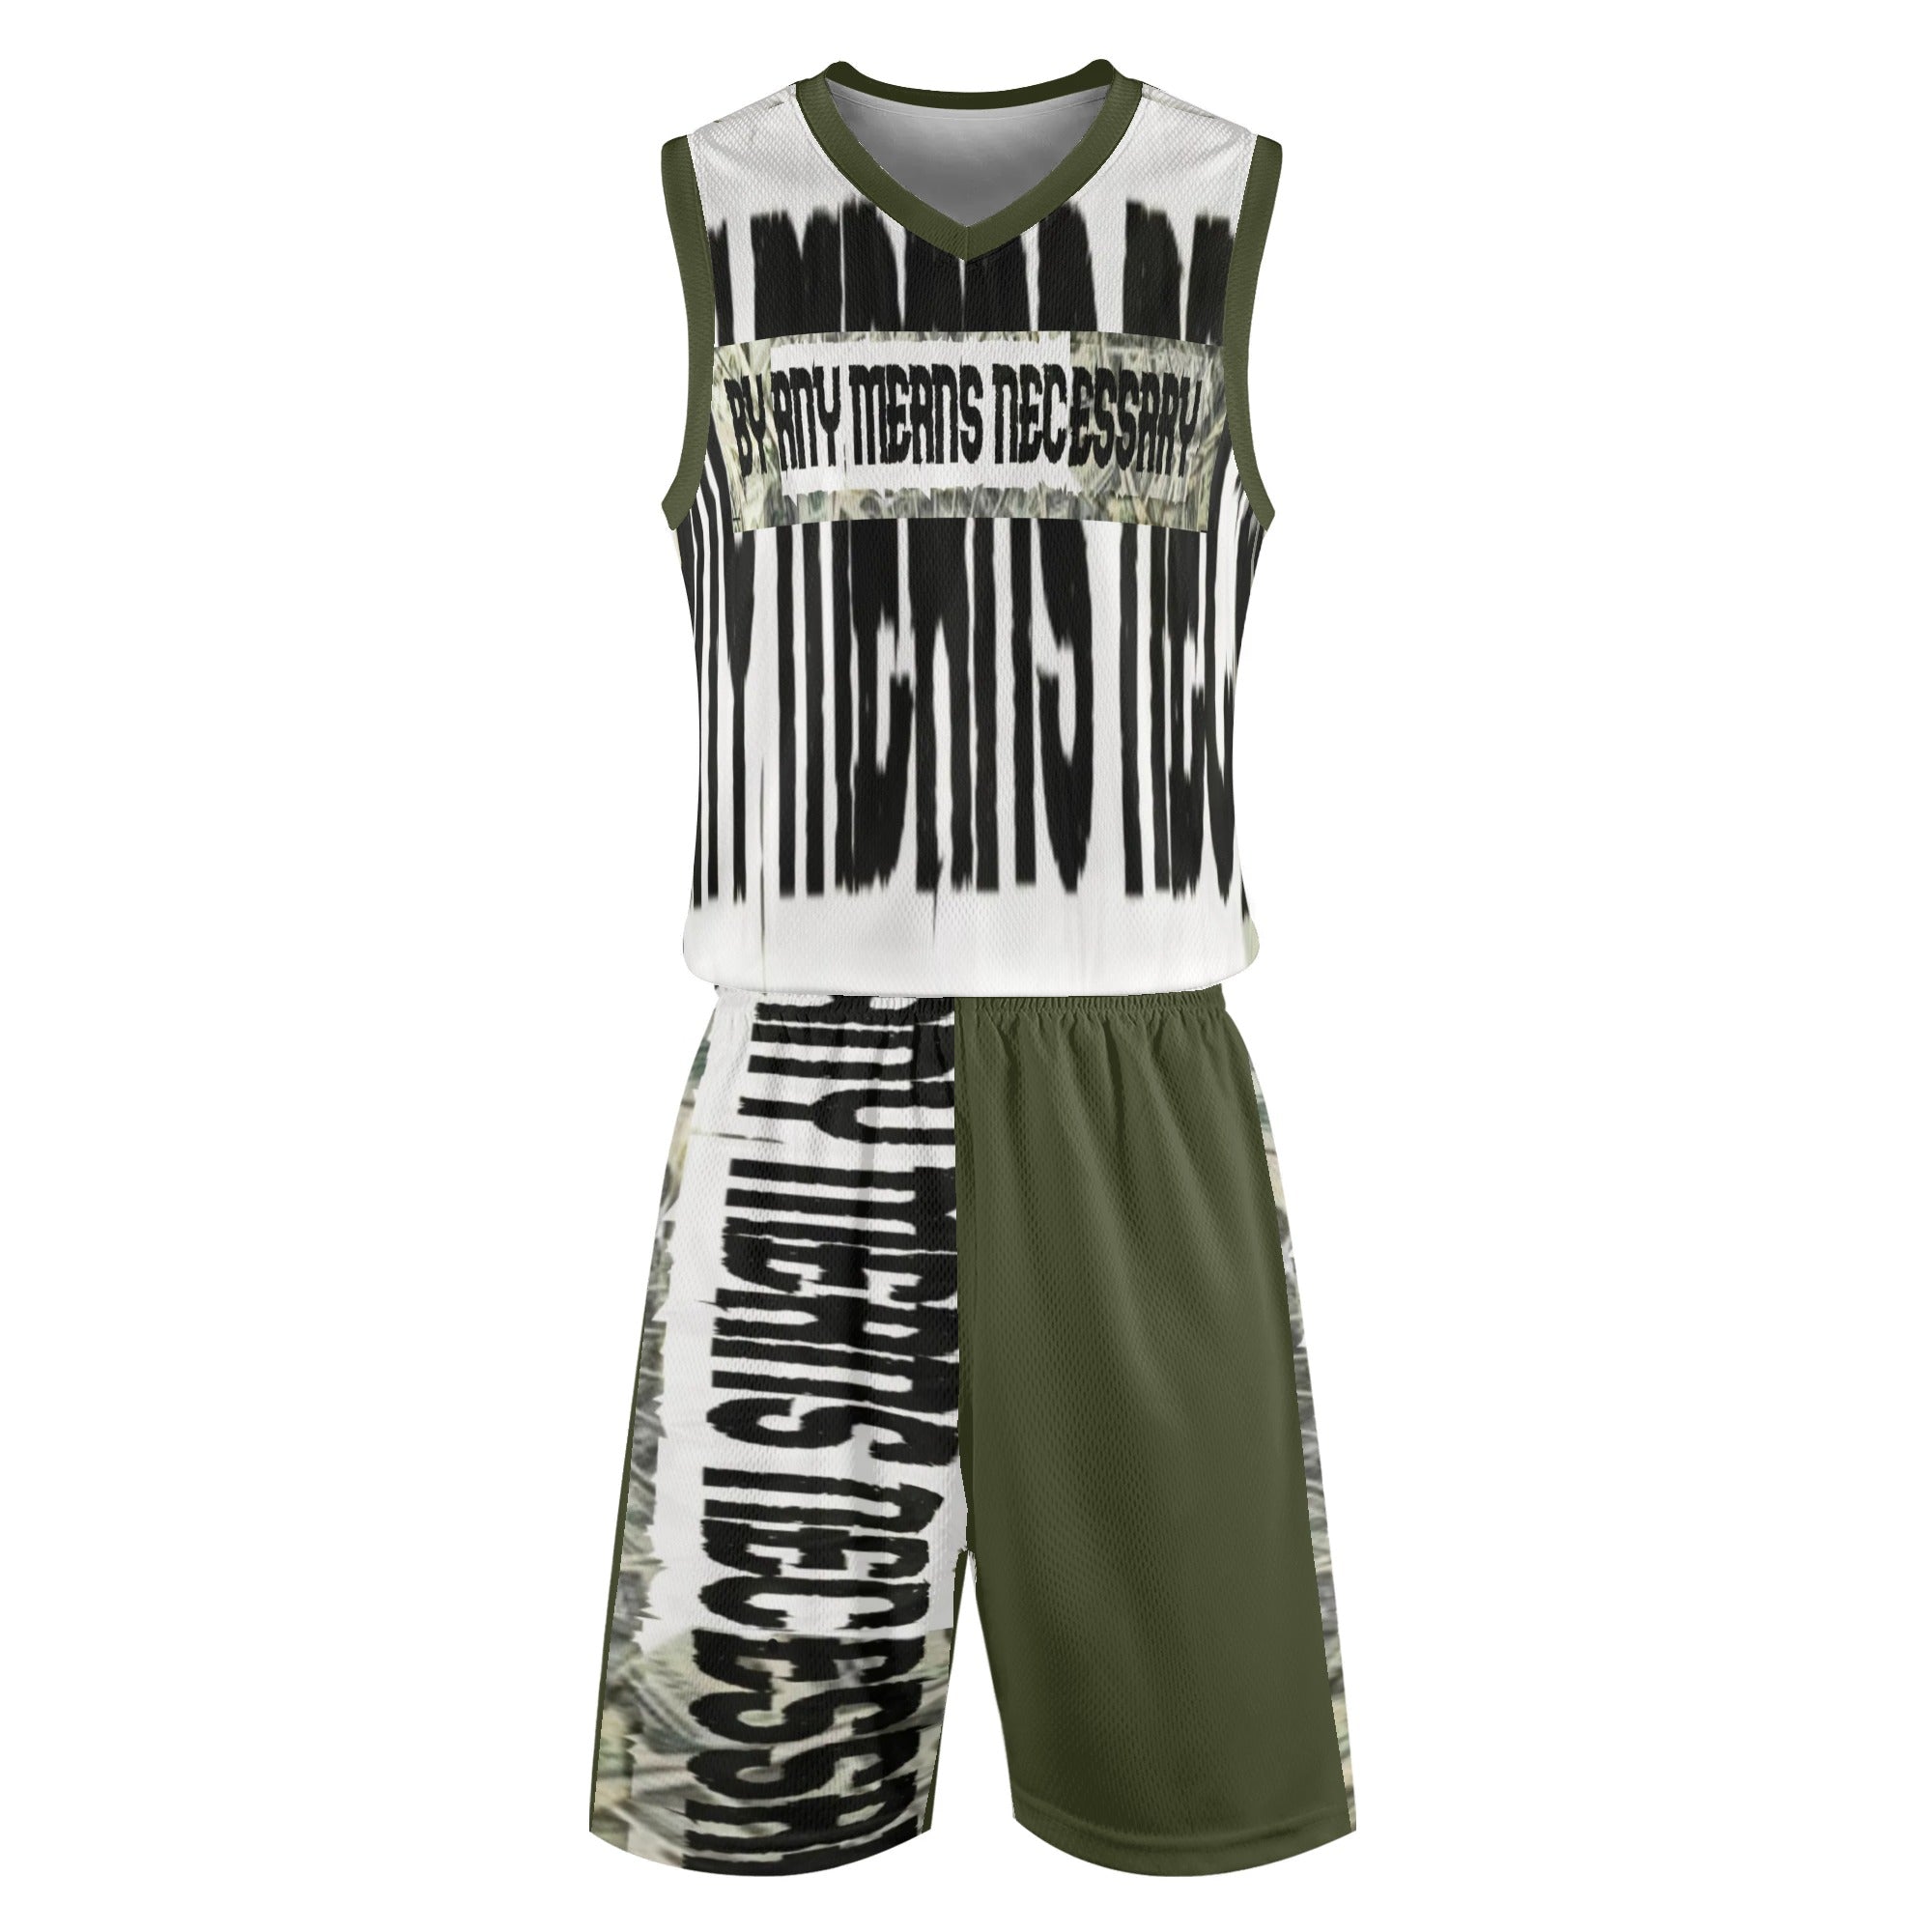 B.A.M.N - By Any Means Necessary Army Green Basketball Jersey Matching Short Sets Outfit